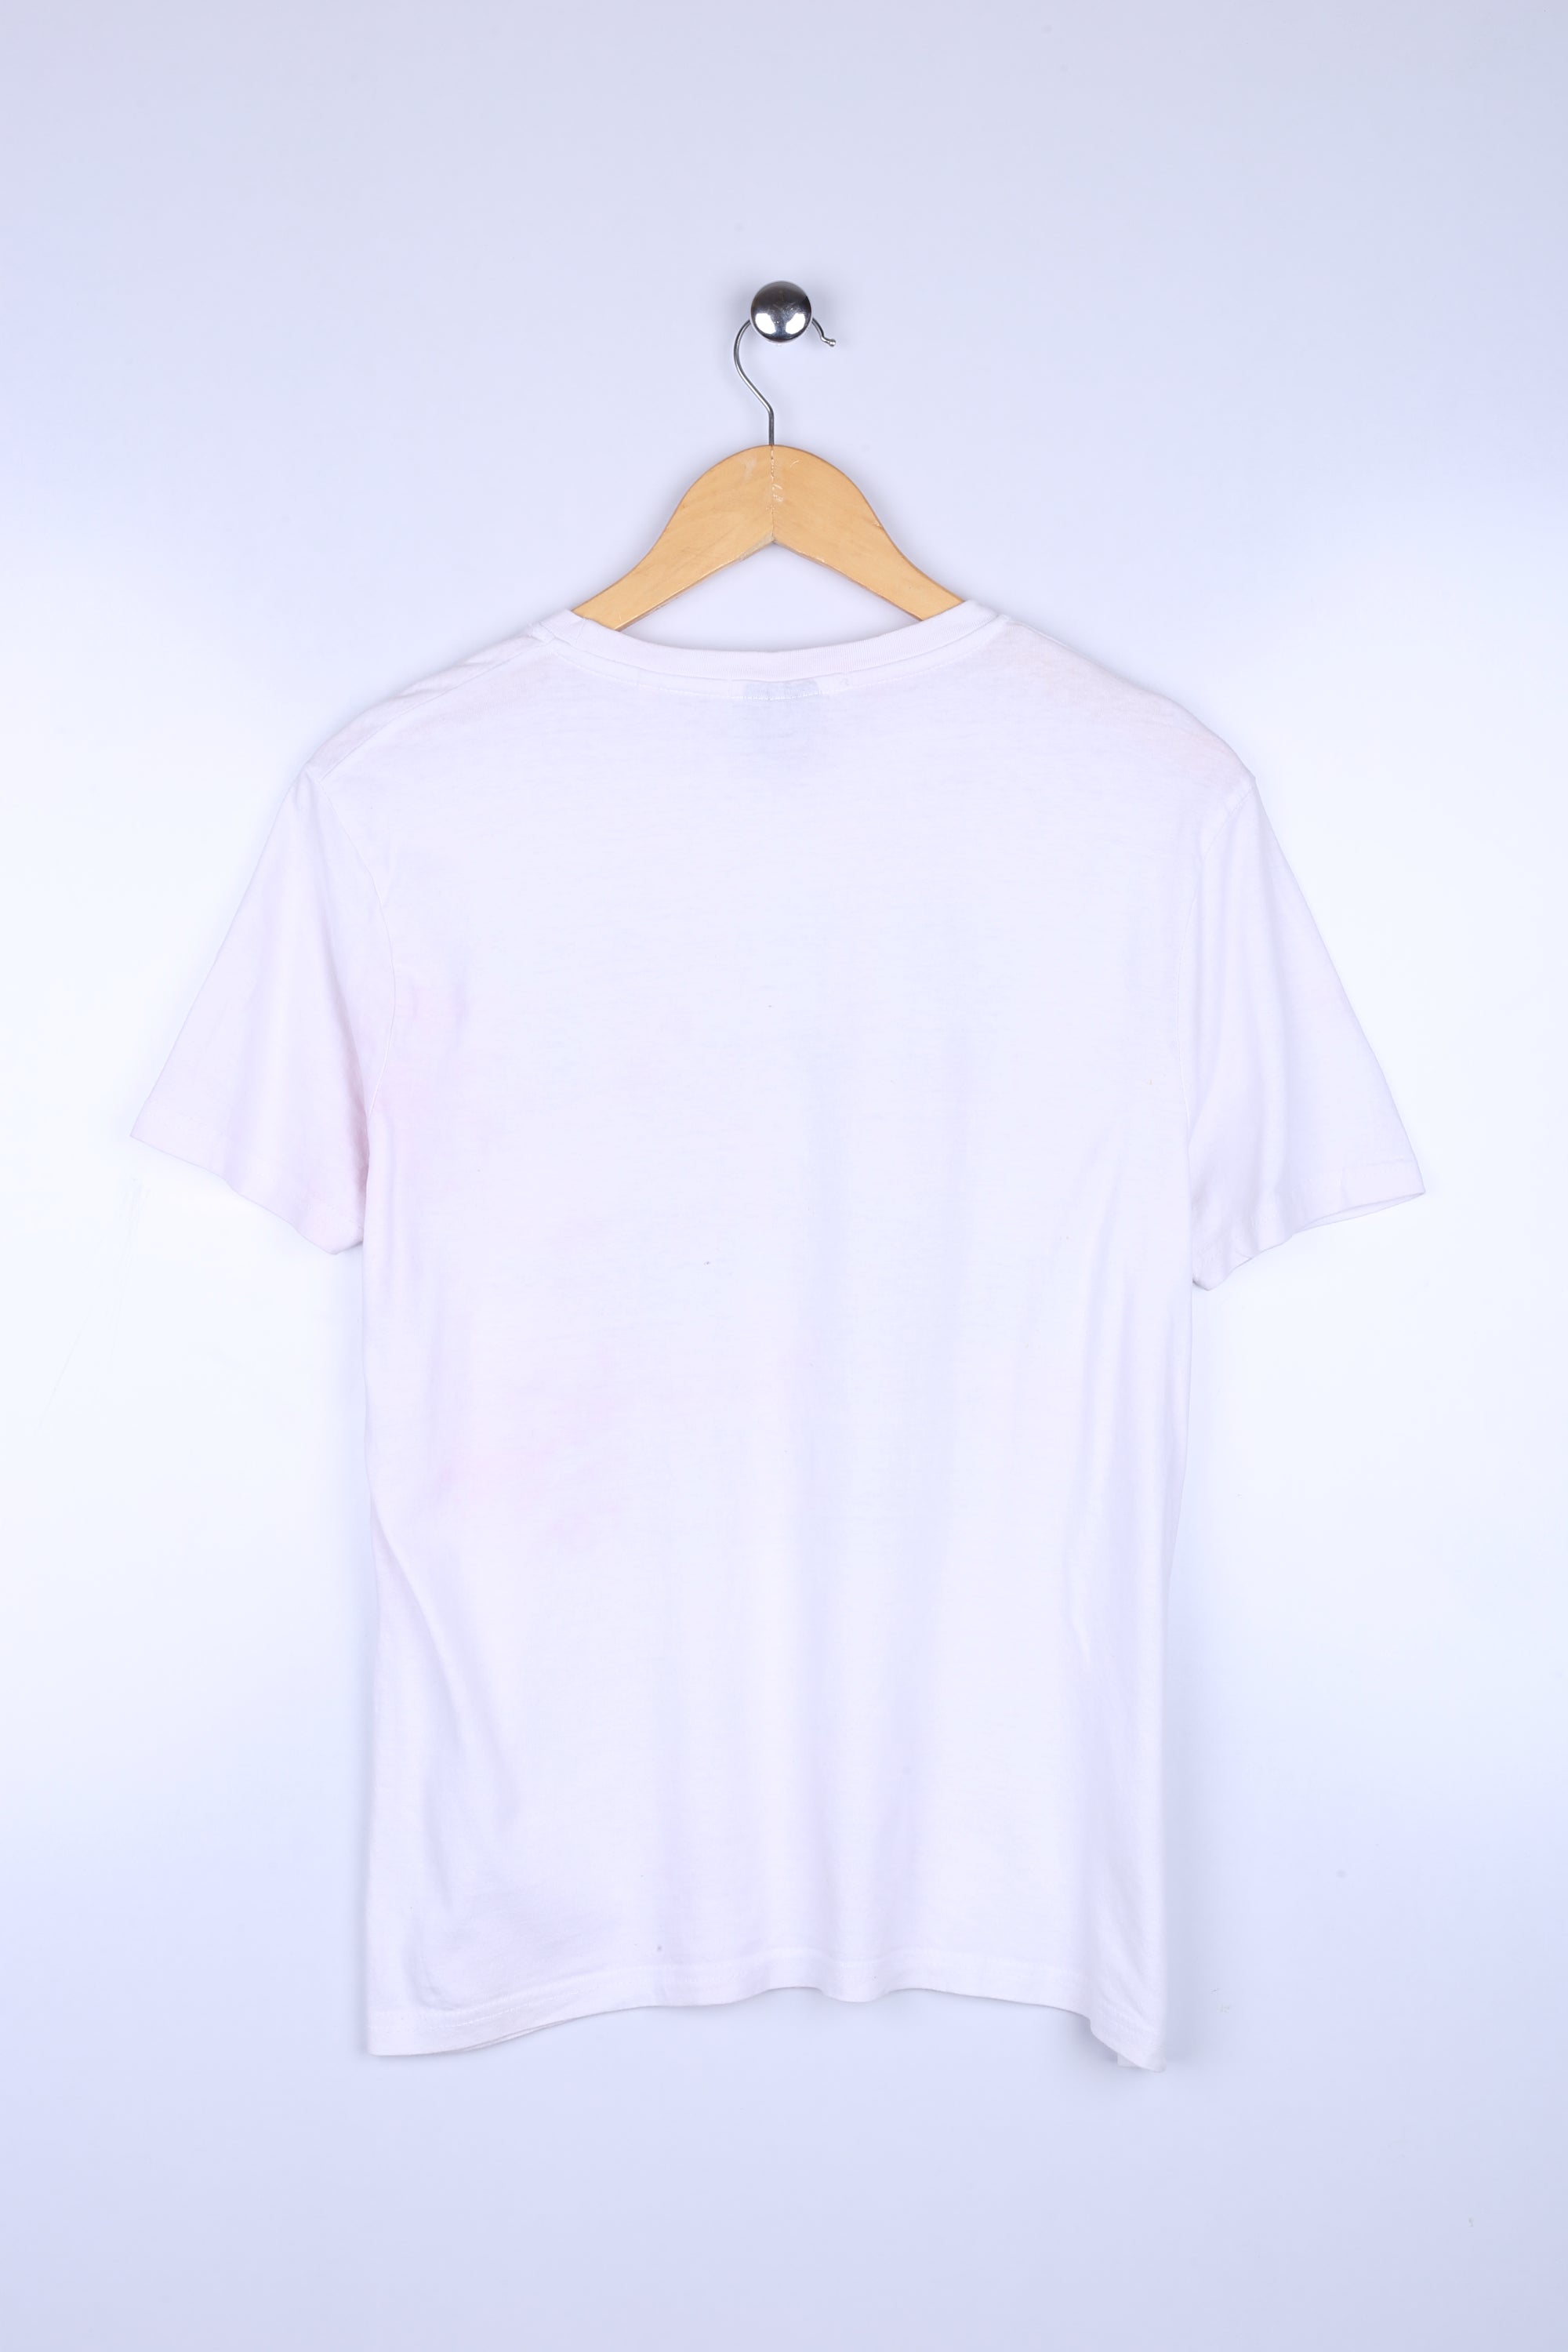 Vintage Richfield Graphic Tee White Small